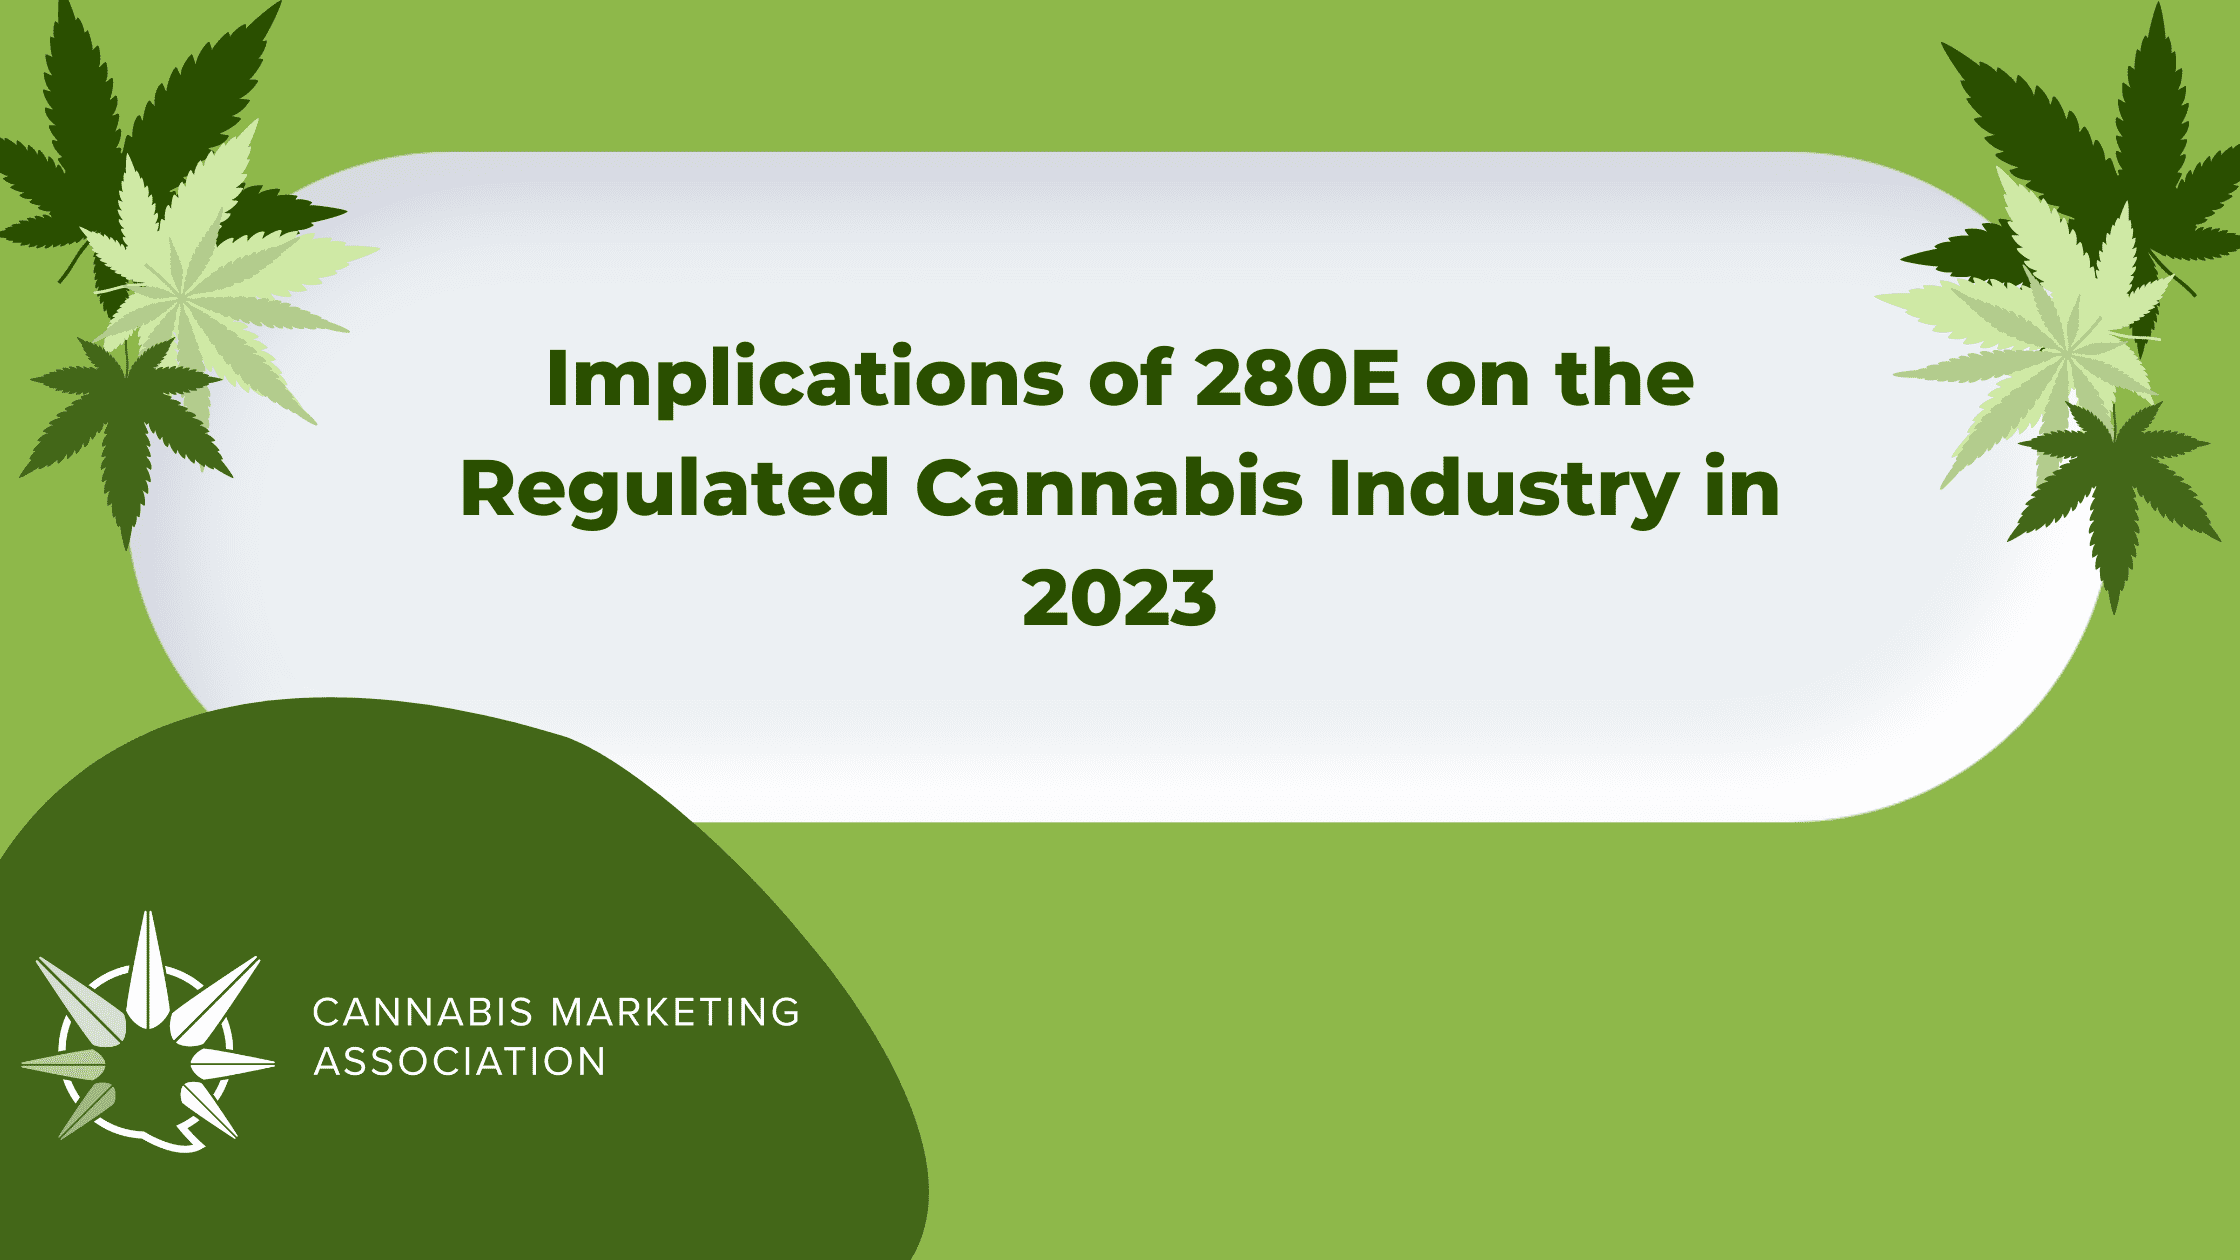 Implications of 280E on the Regulated Cannabis Industry in 2023